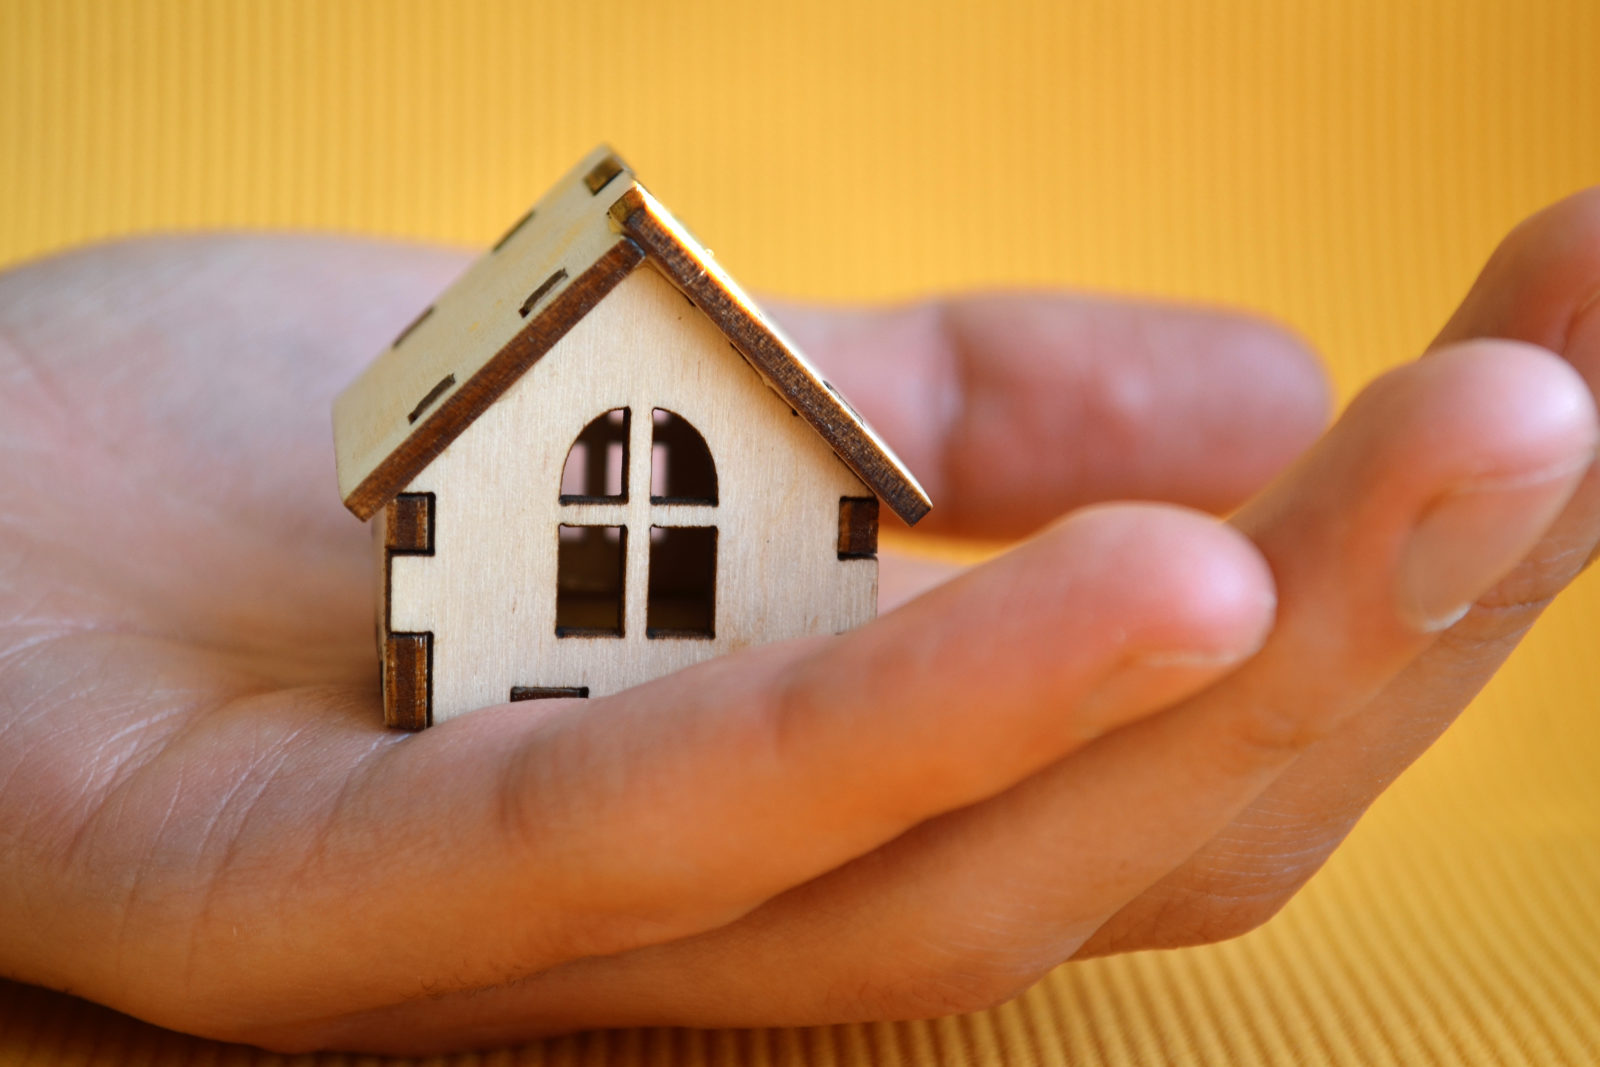 Wooden toy house model in man's hand on yellow background front view